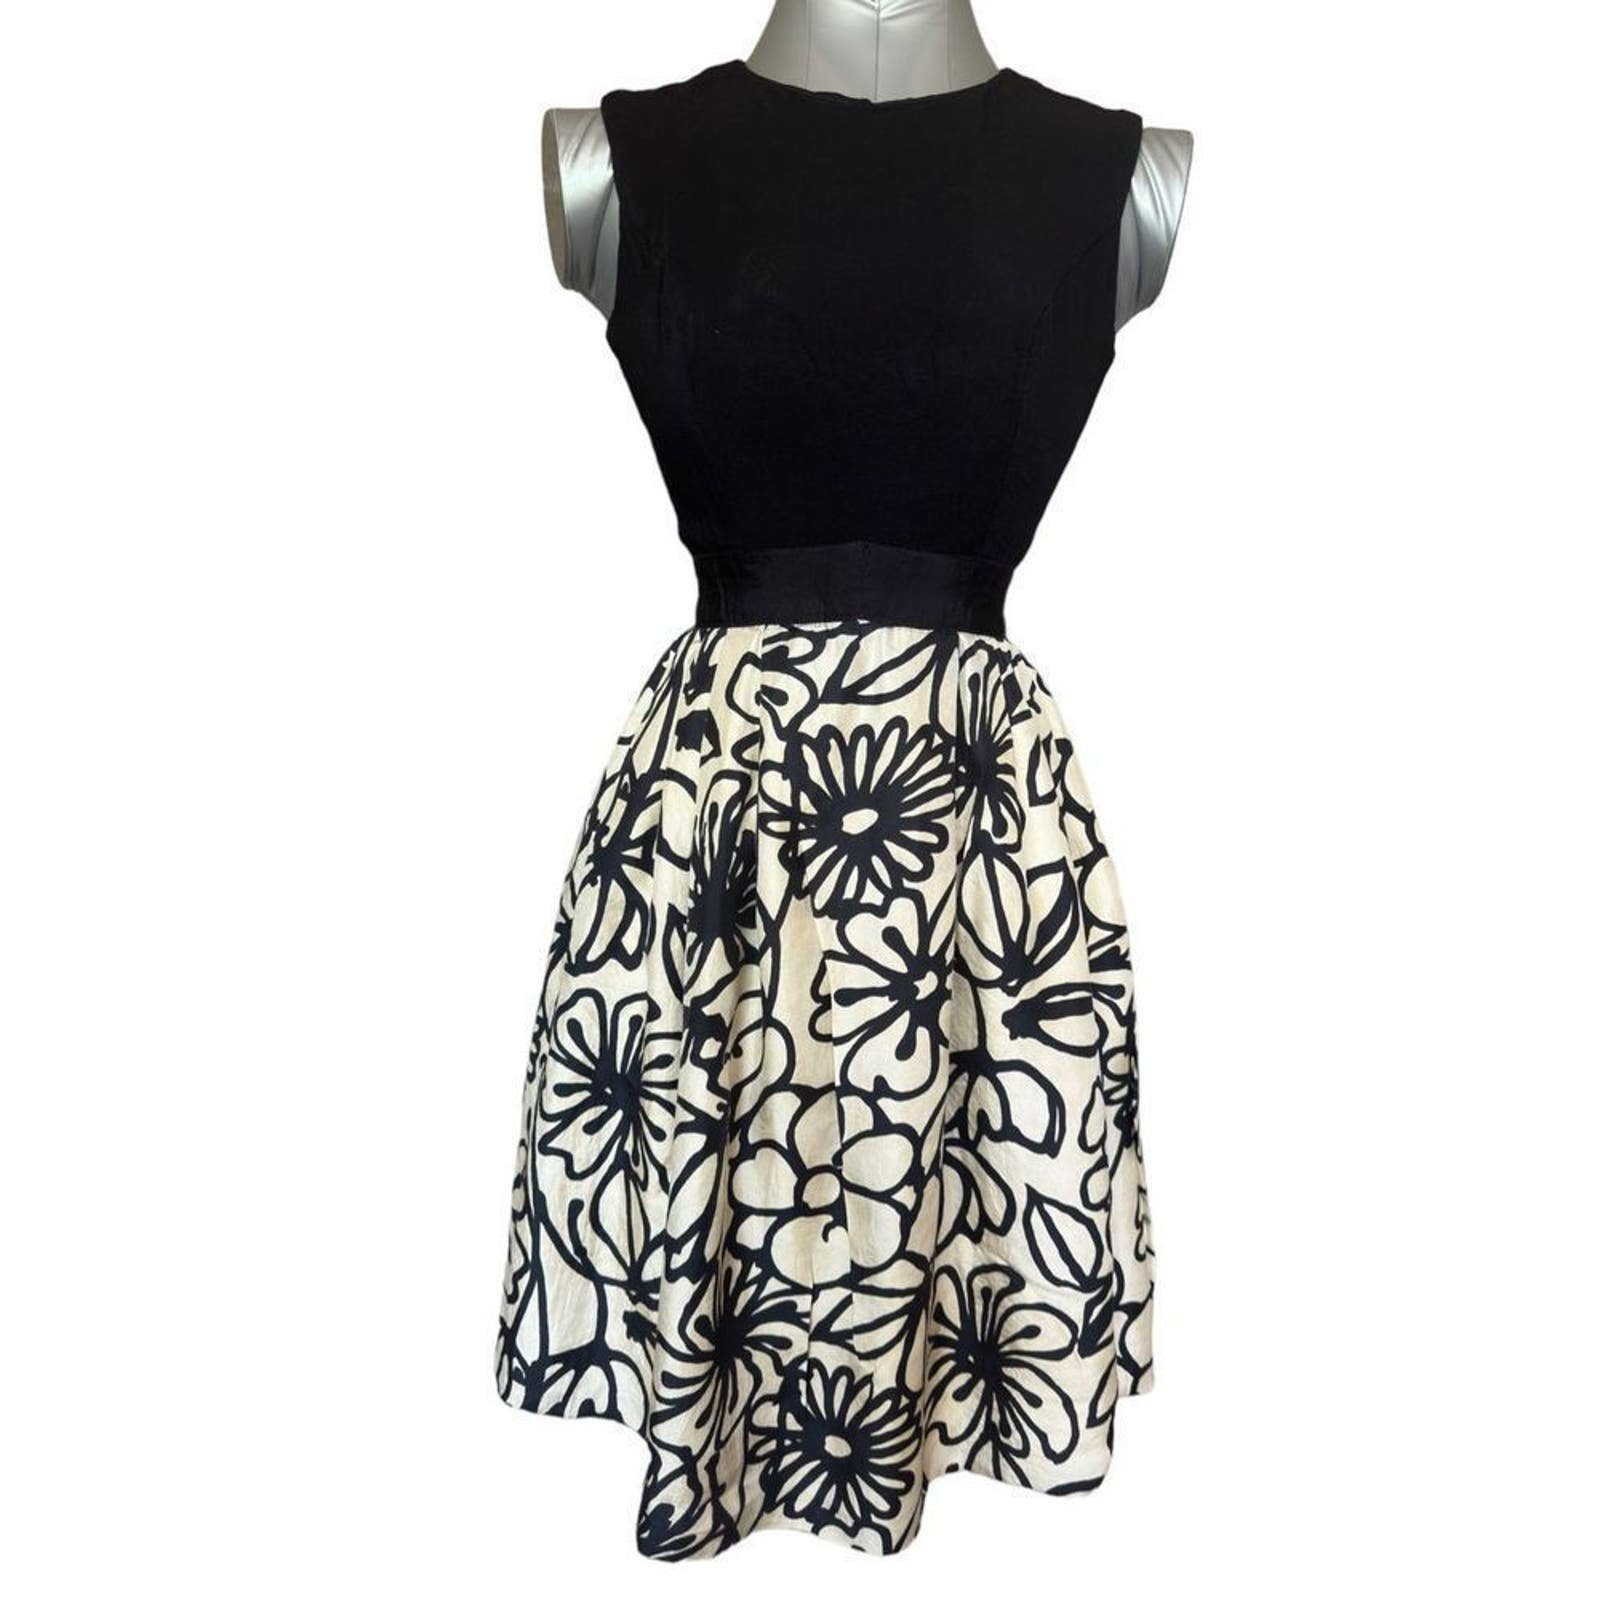 Beautiful Lord & Taylor Black White Floral Sleeveless Fit & Flare Mini Dress Size Small PRc0ryKsC New Style